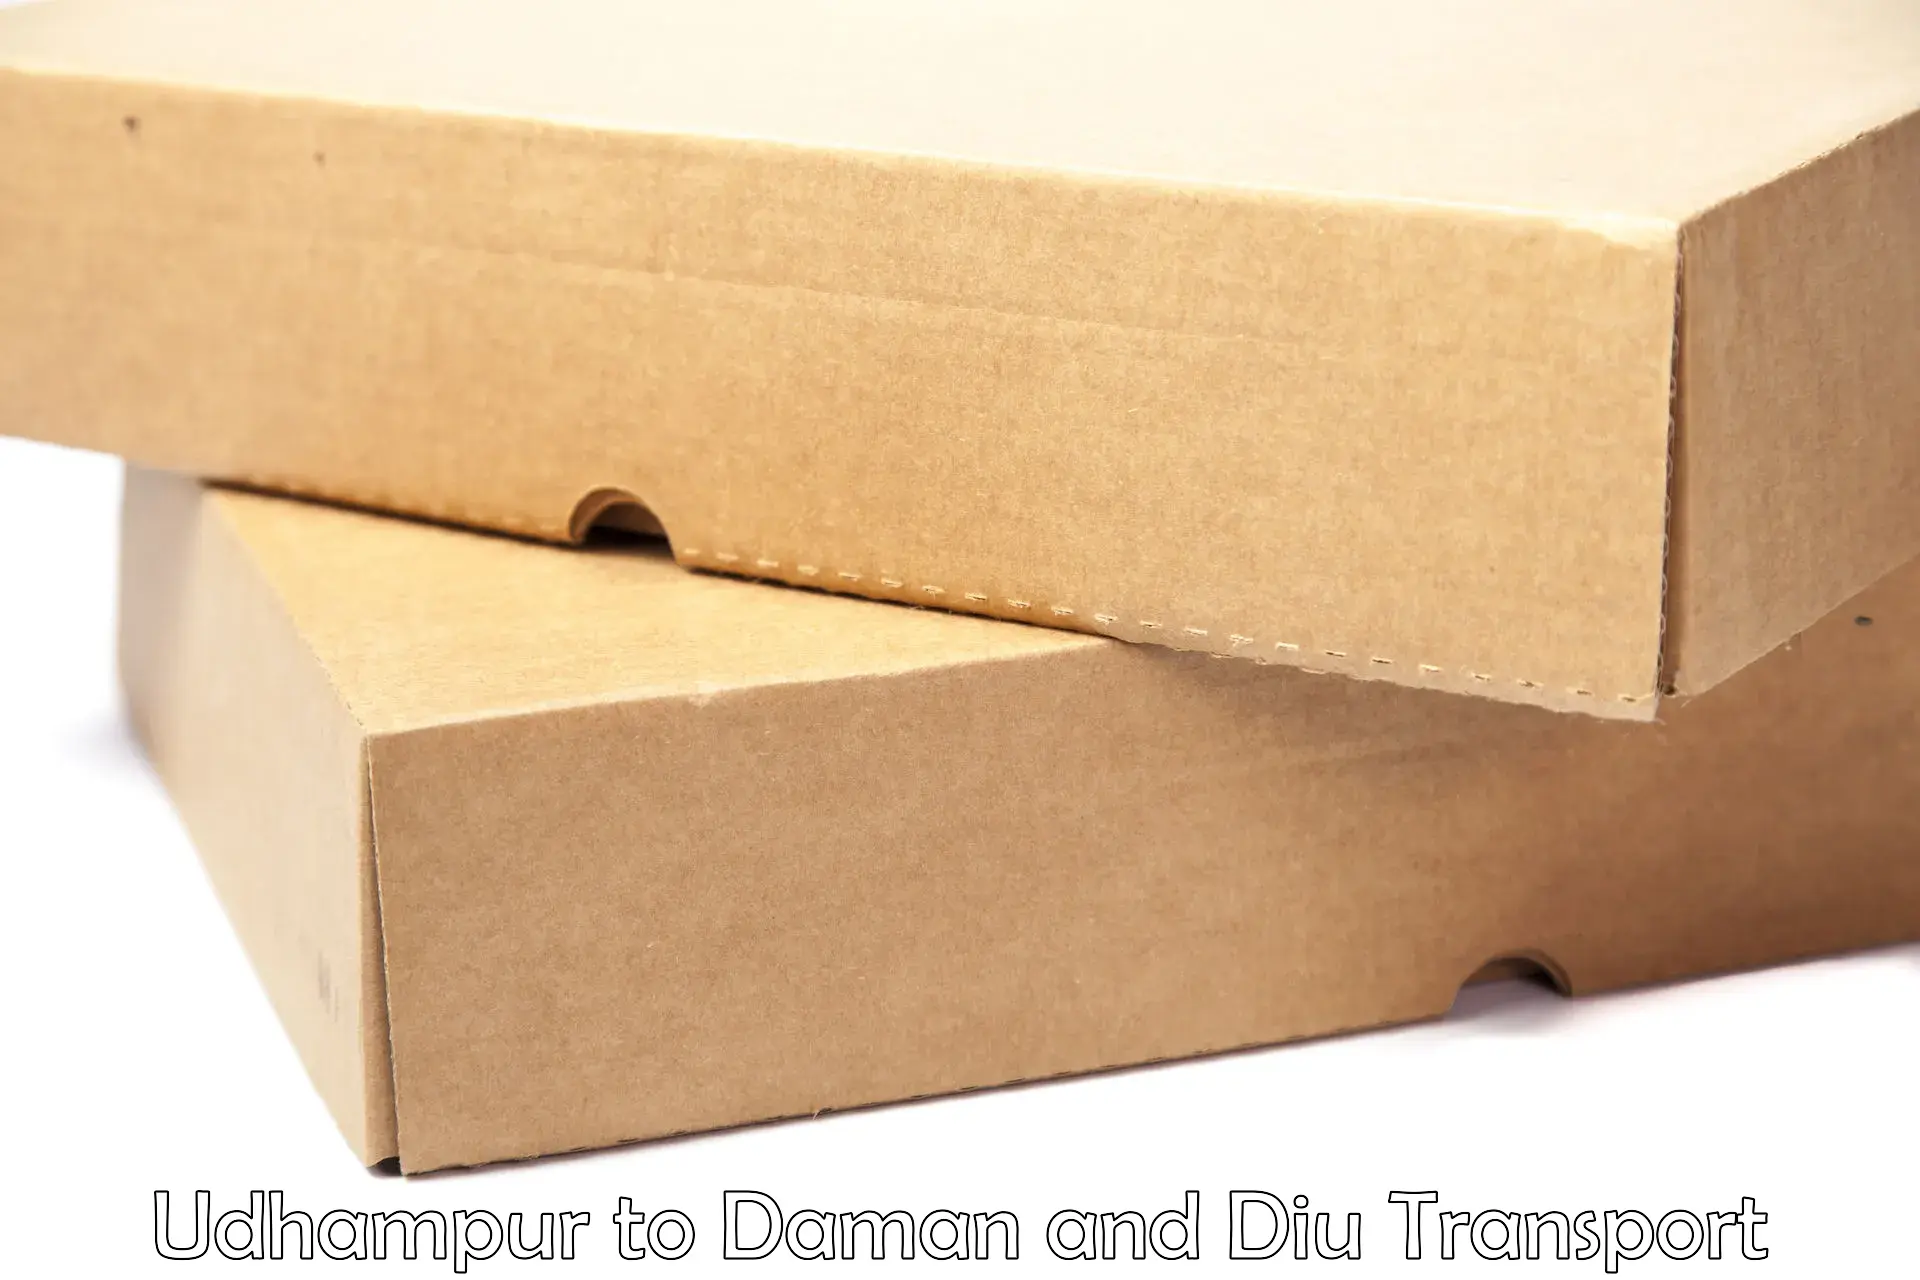 Express transport services Udhampur to Daman and Diu